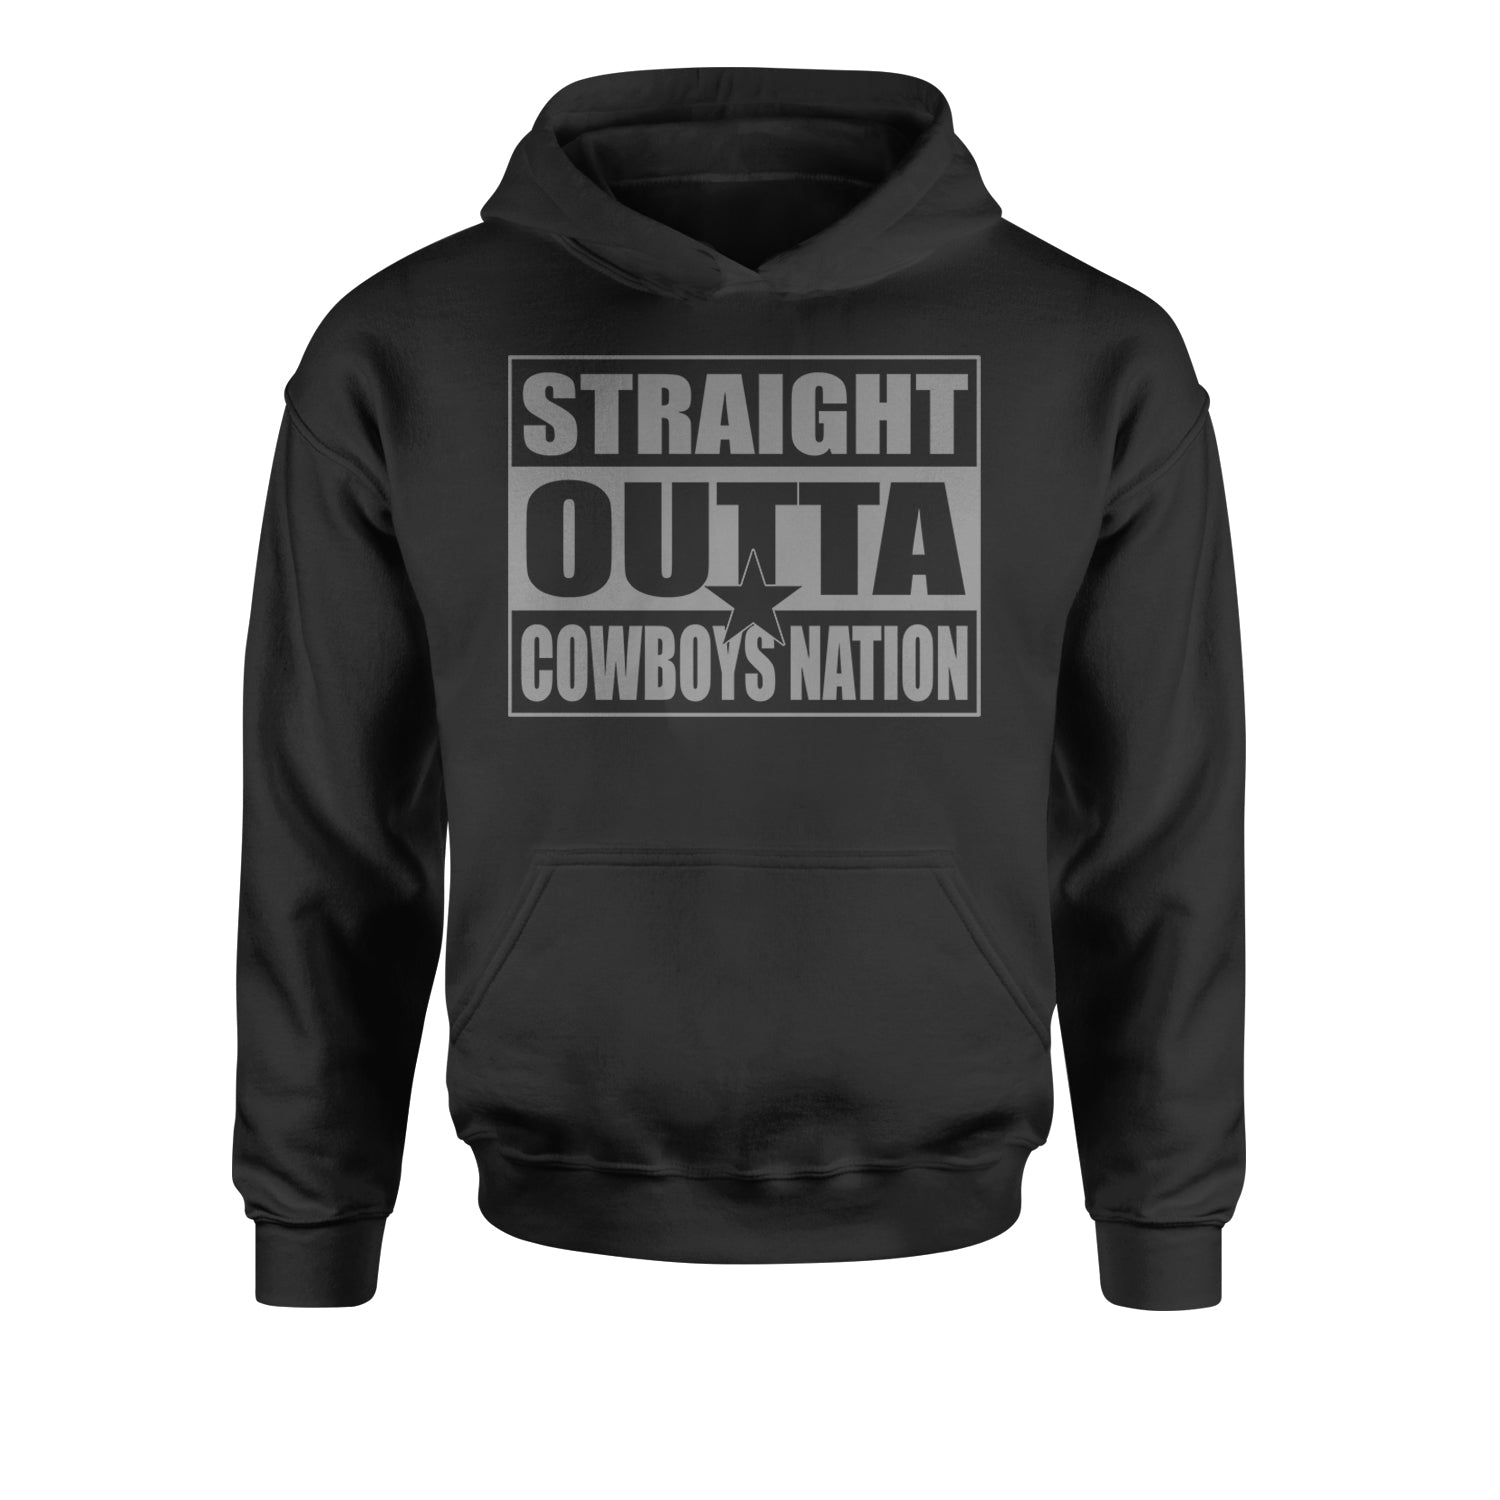 Straight Outta Cowboys Nation   Youth-Sized Hoodie